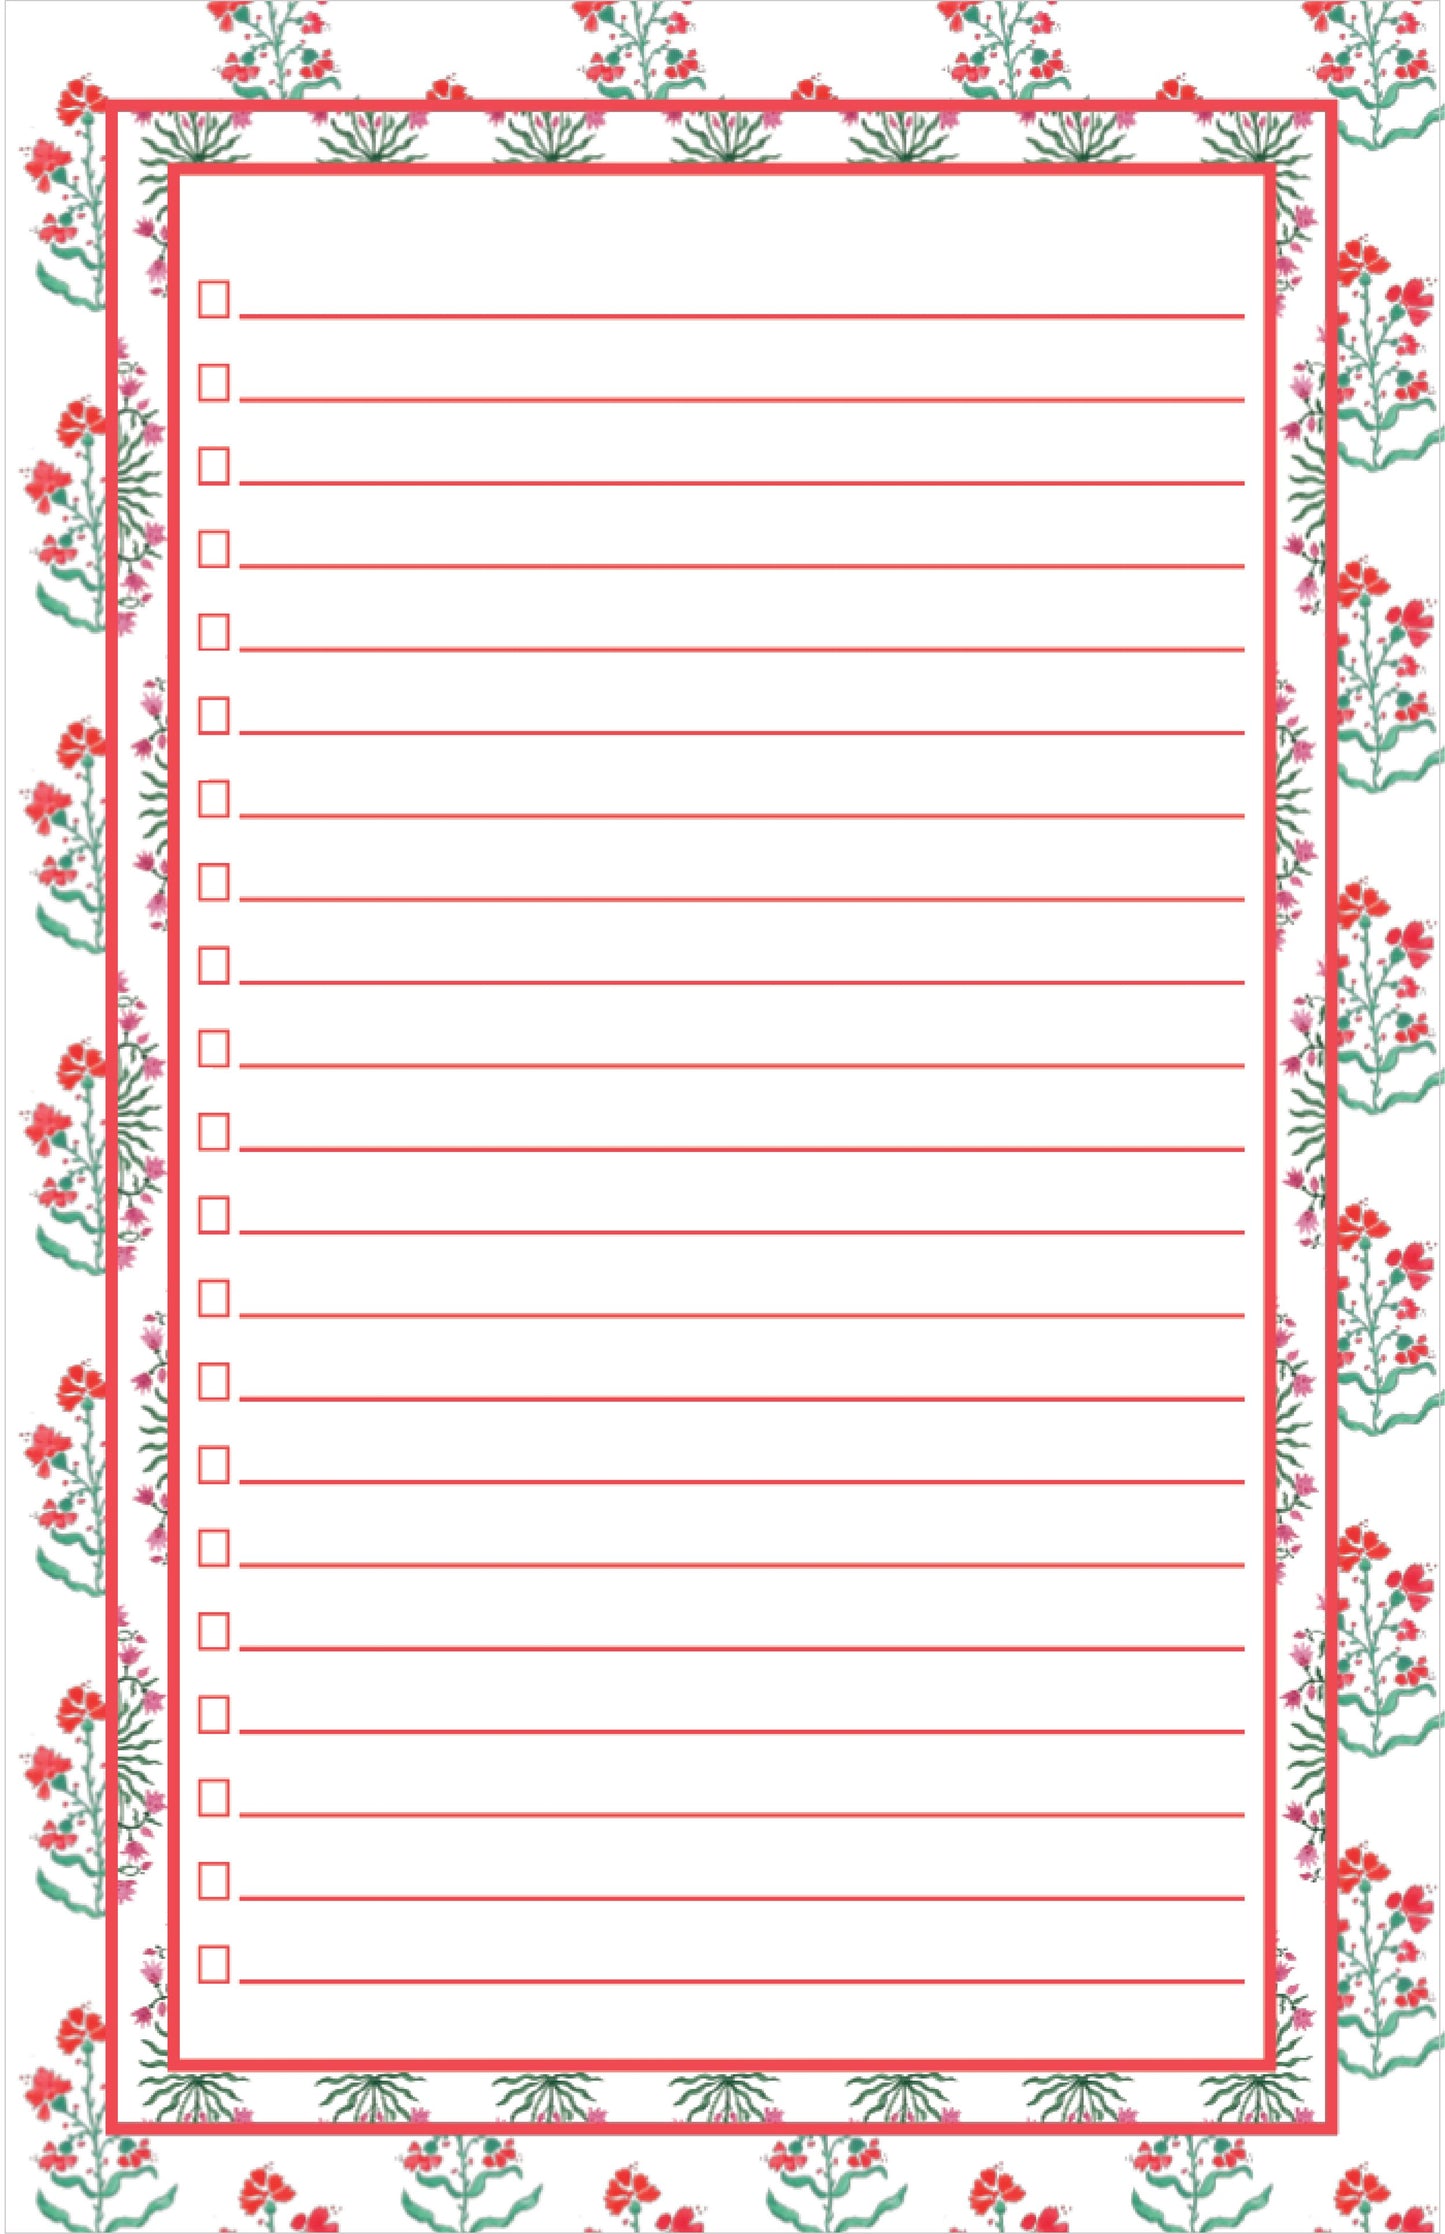 Double Print Reds Checklist Notepad